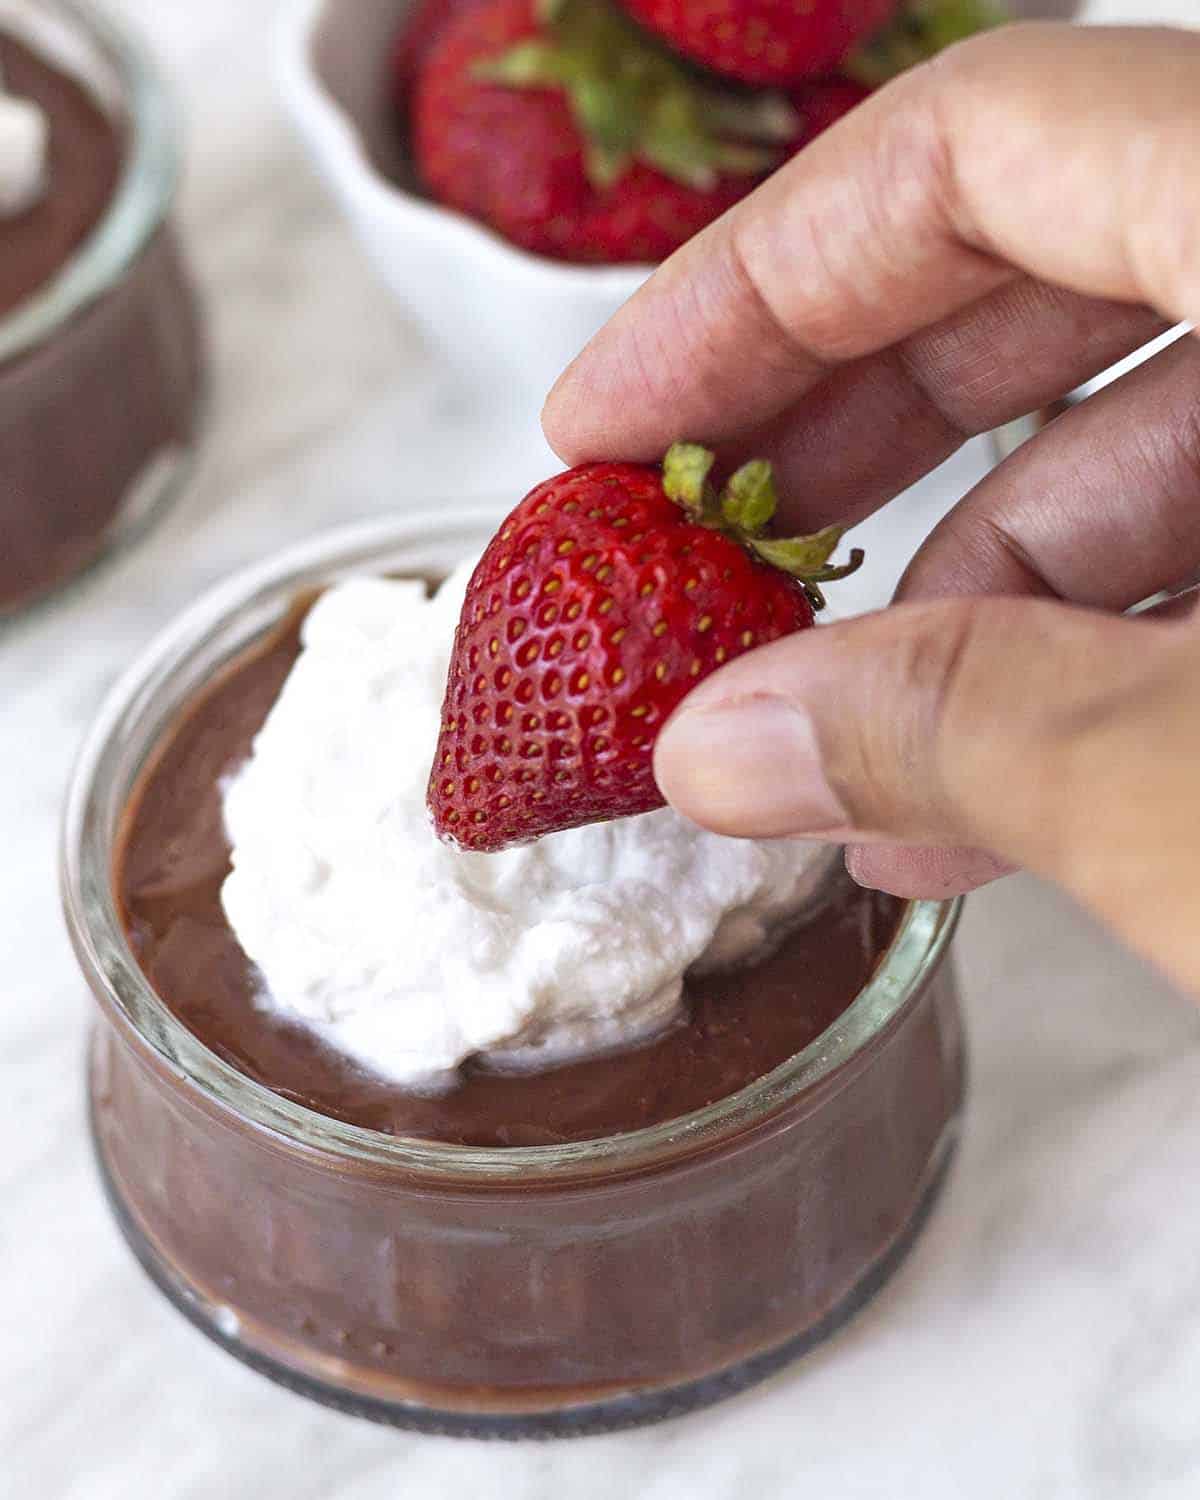 A hand putting a fresh strawberry on top of a small bowl of eggless chocolate pudding.